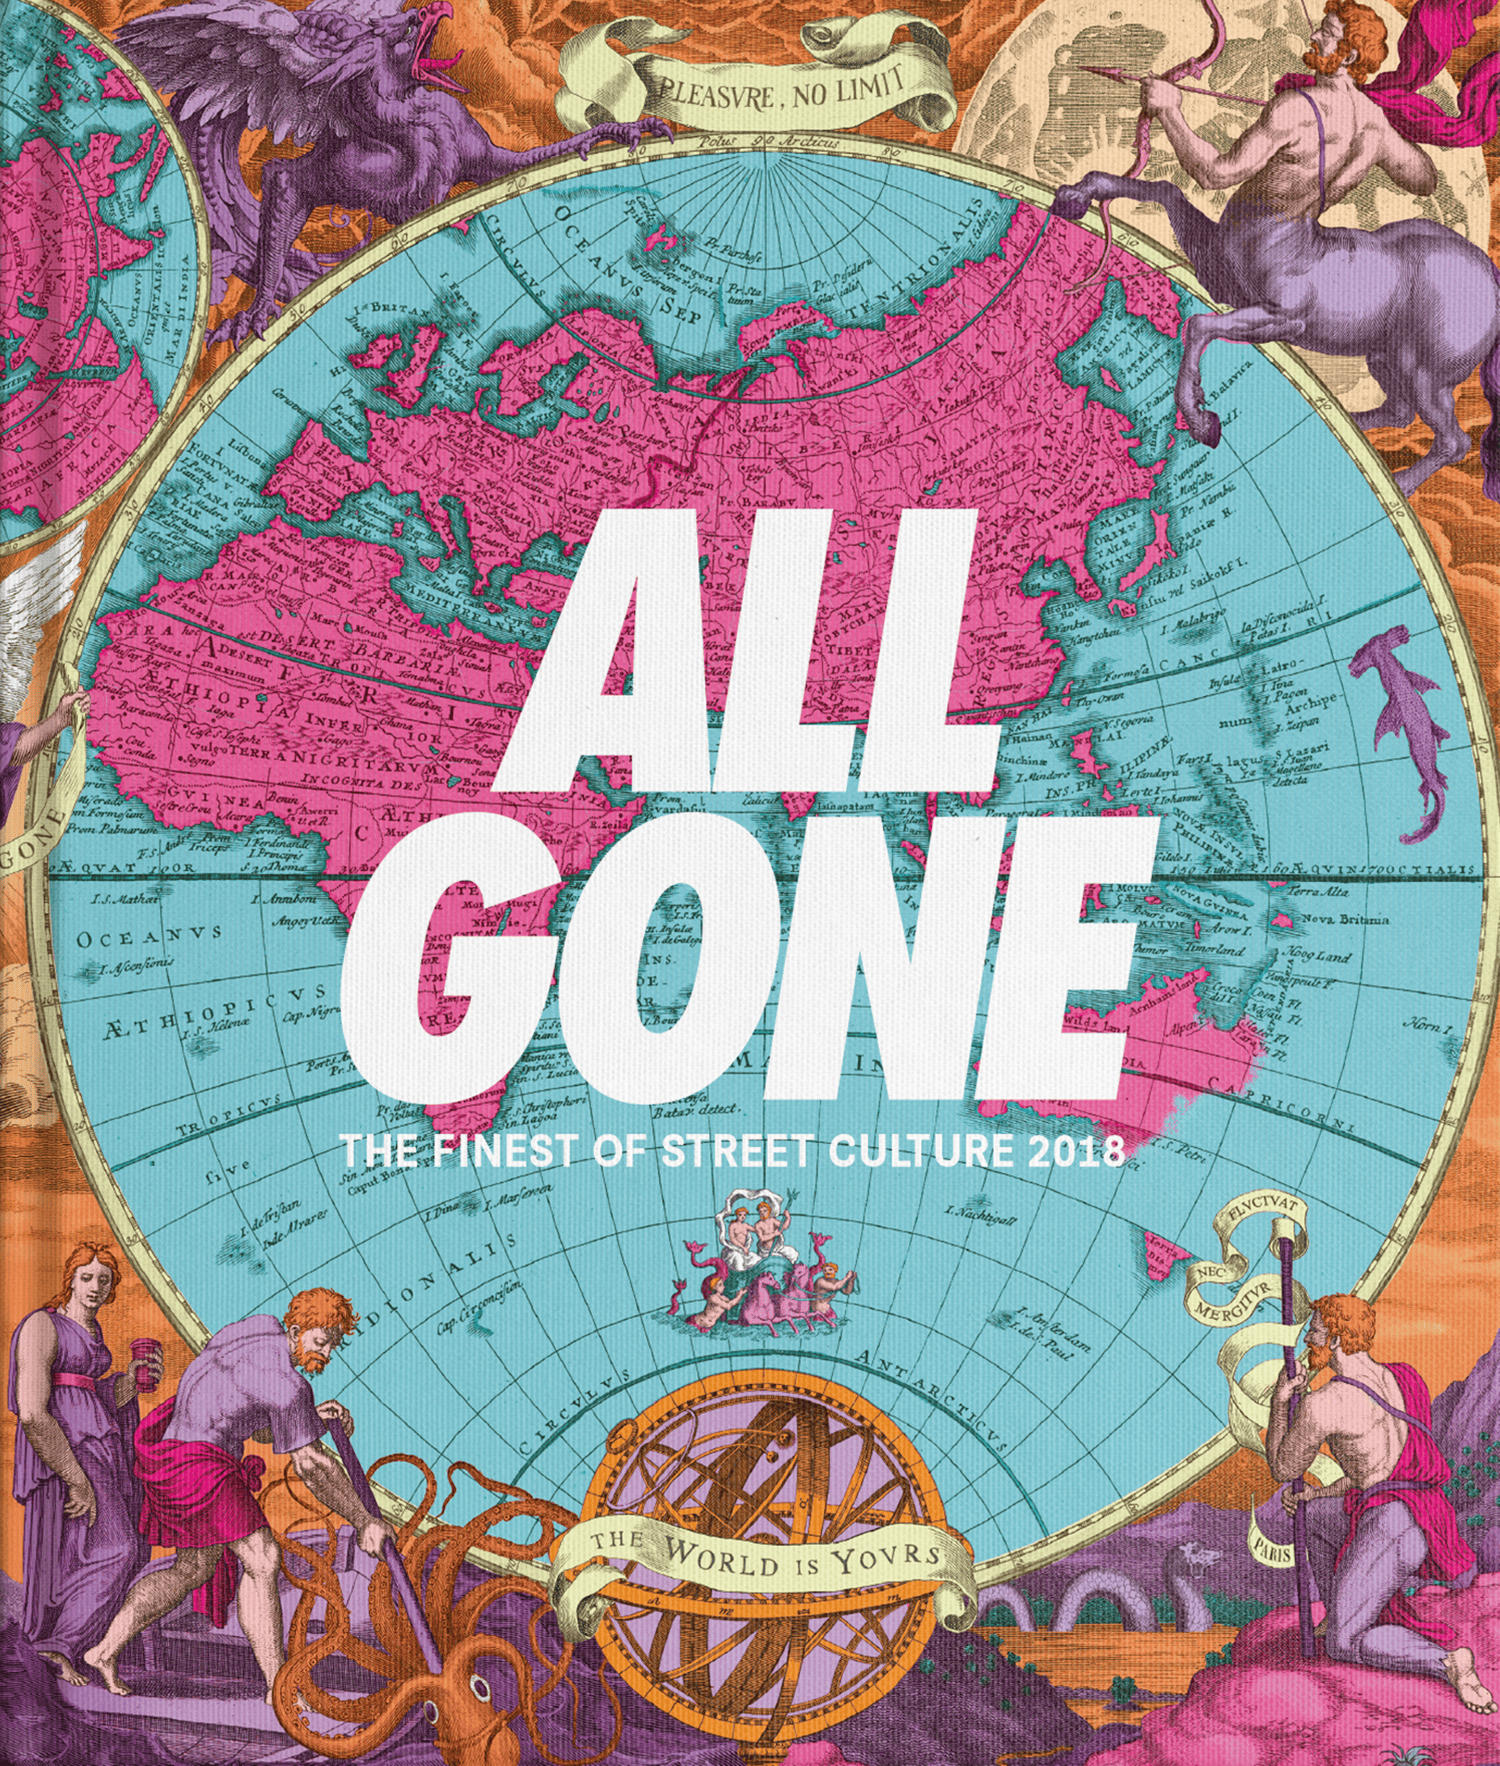 Book　2018]　Gone　ALL　CULTURE　THE　GONE　–　—　FINEST　All　OF　STREET　ALL　GONE